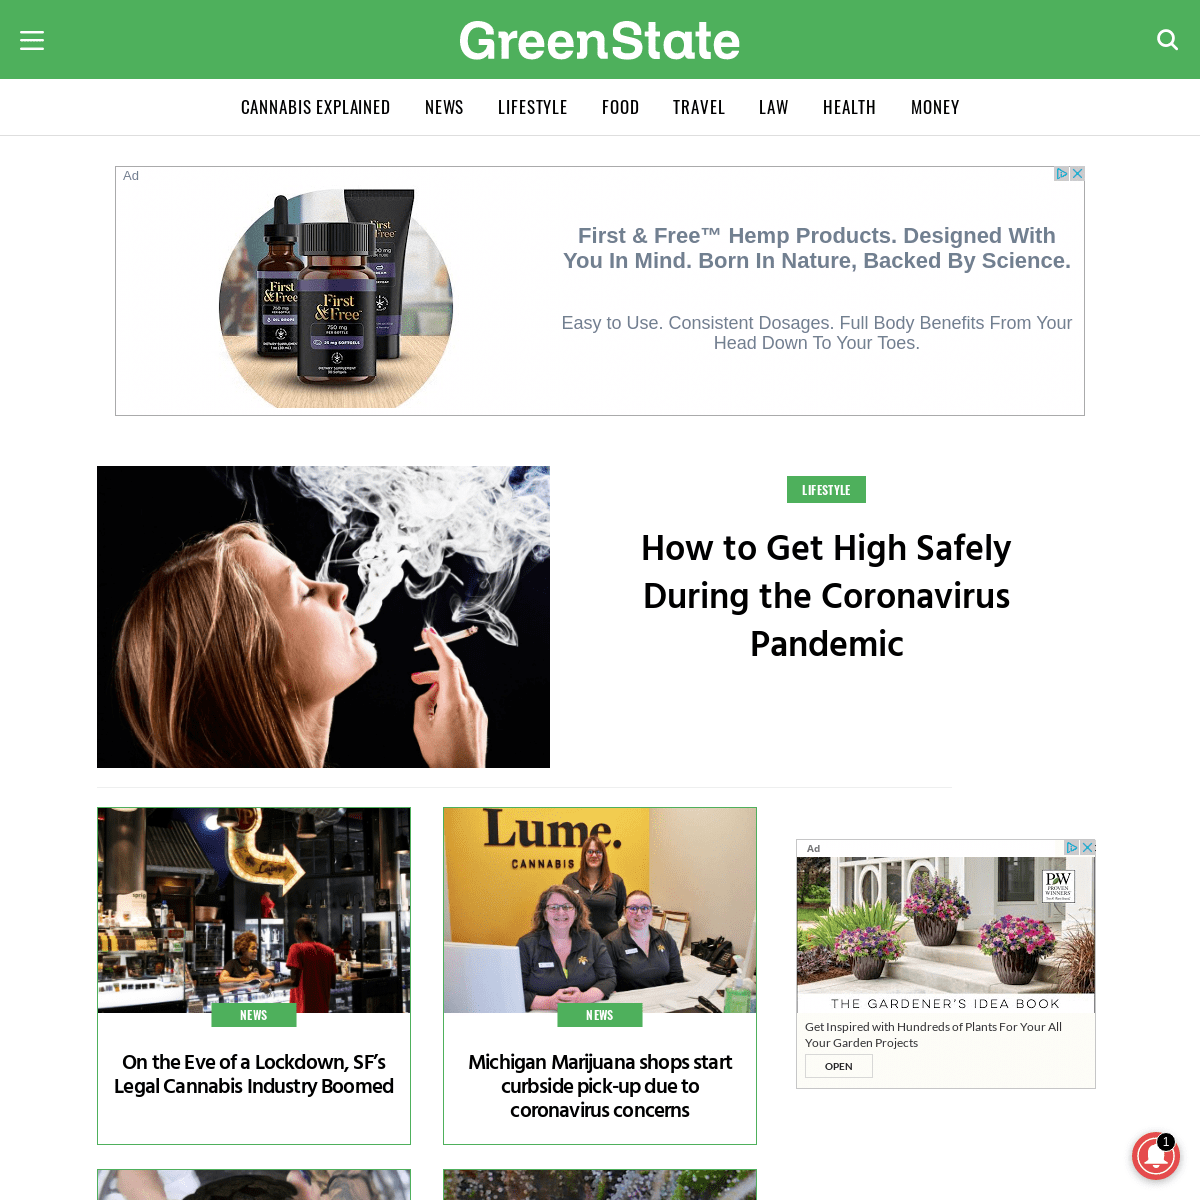 A complete backup of greenstate.com